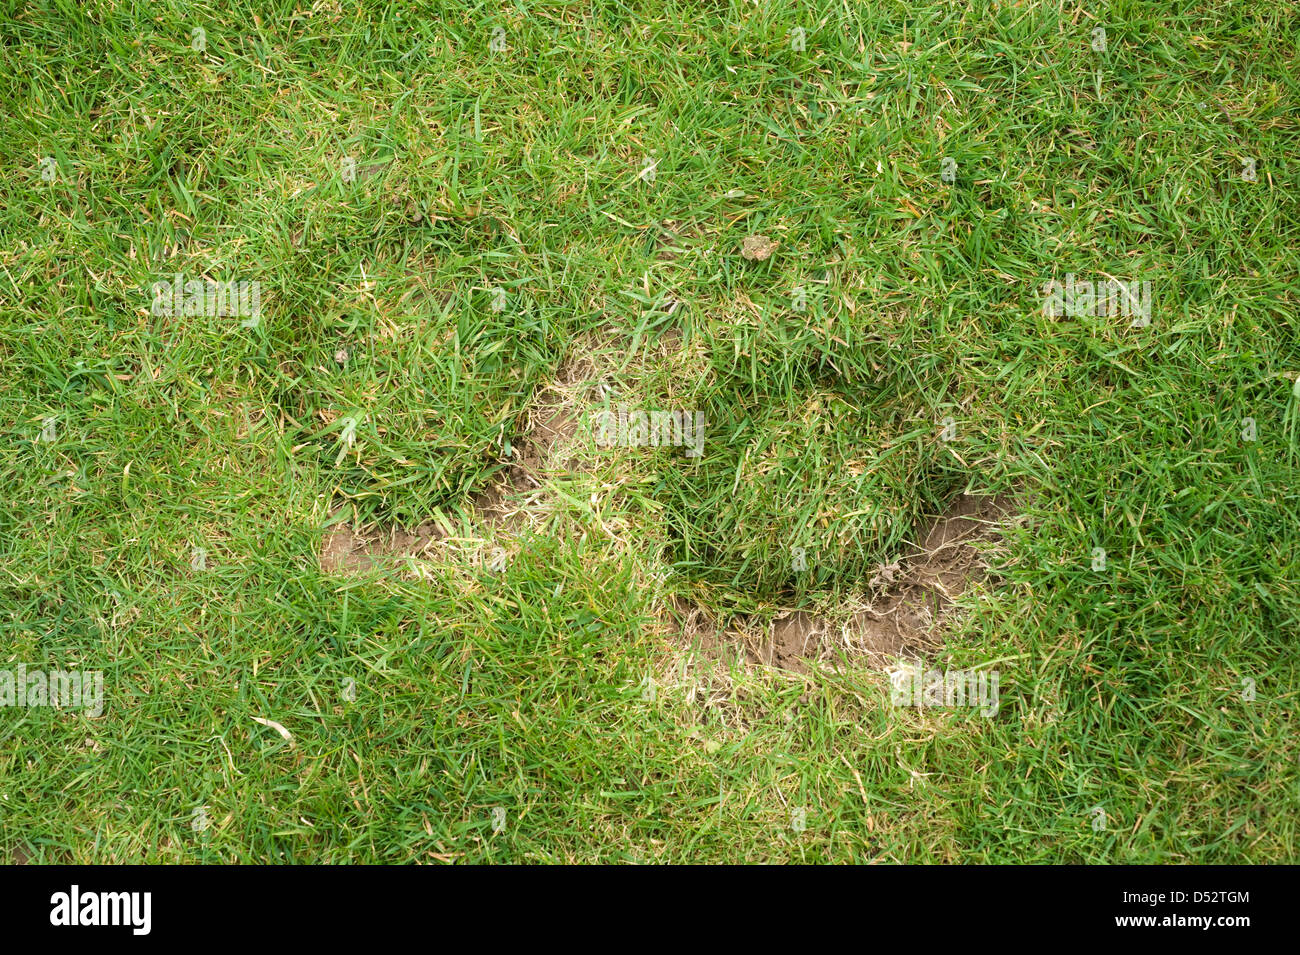 Horse hoof prints damage to a garden lawn Stock Photo